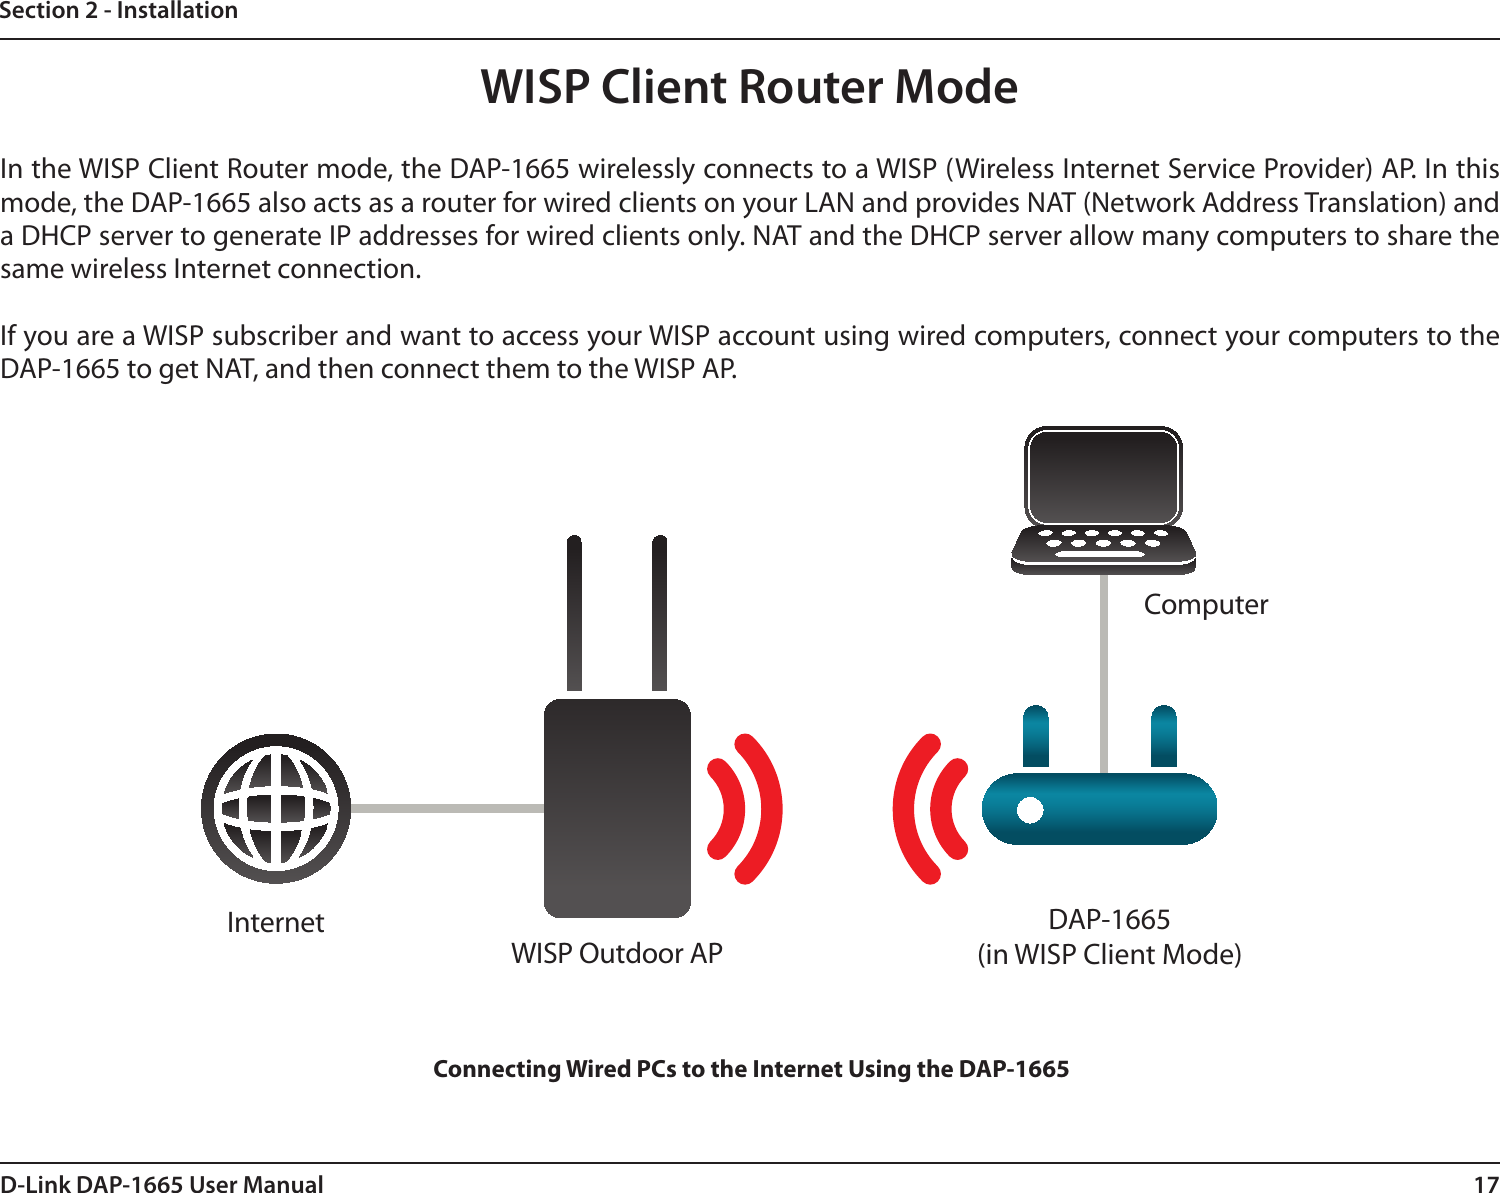 17D-Link DAP-1665 User ManualSection 2 - InstallationWISP Client Router ModeIn the WISP Client Router mode, the DAP-1665 wirelessly connects to a WISP (Wireless Internet Service Provider) AP. In this mode, the DAP-1665 also acts as a router for wired clients on your LAN and provides NAT (Network Address Translation) and a DHCP server to generate IP addresses for wired clients only. NAT and the DHCP server allow many computers to share the same wireless Internet connection.If you are a WISP subscriber and want to access your WISP account using wired computers, connect your computers to the DAP-1665 to get NAT, and then connect them to the WISP AP.InternetComputerDAP-1360(In WISP Client Mode)WISP Outdoor APConnecting Wired PCs to the Internet Using the DAP-1665DAP-1665(in WISP Client Mode)